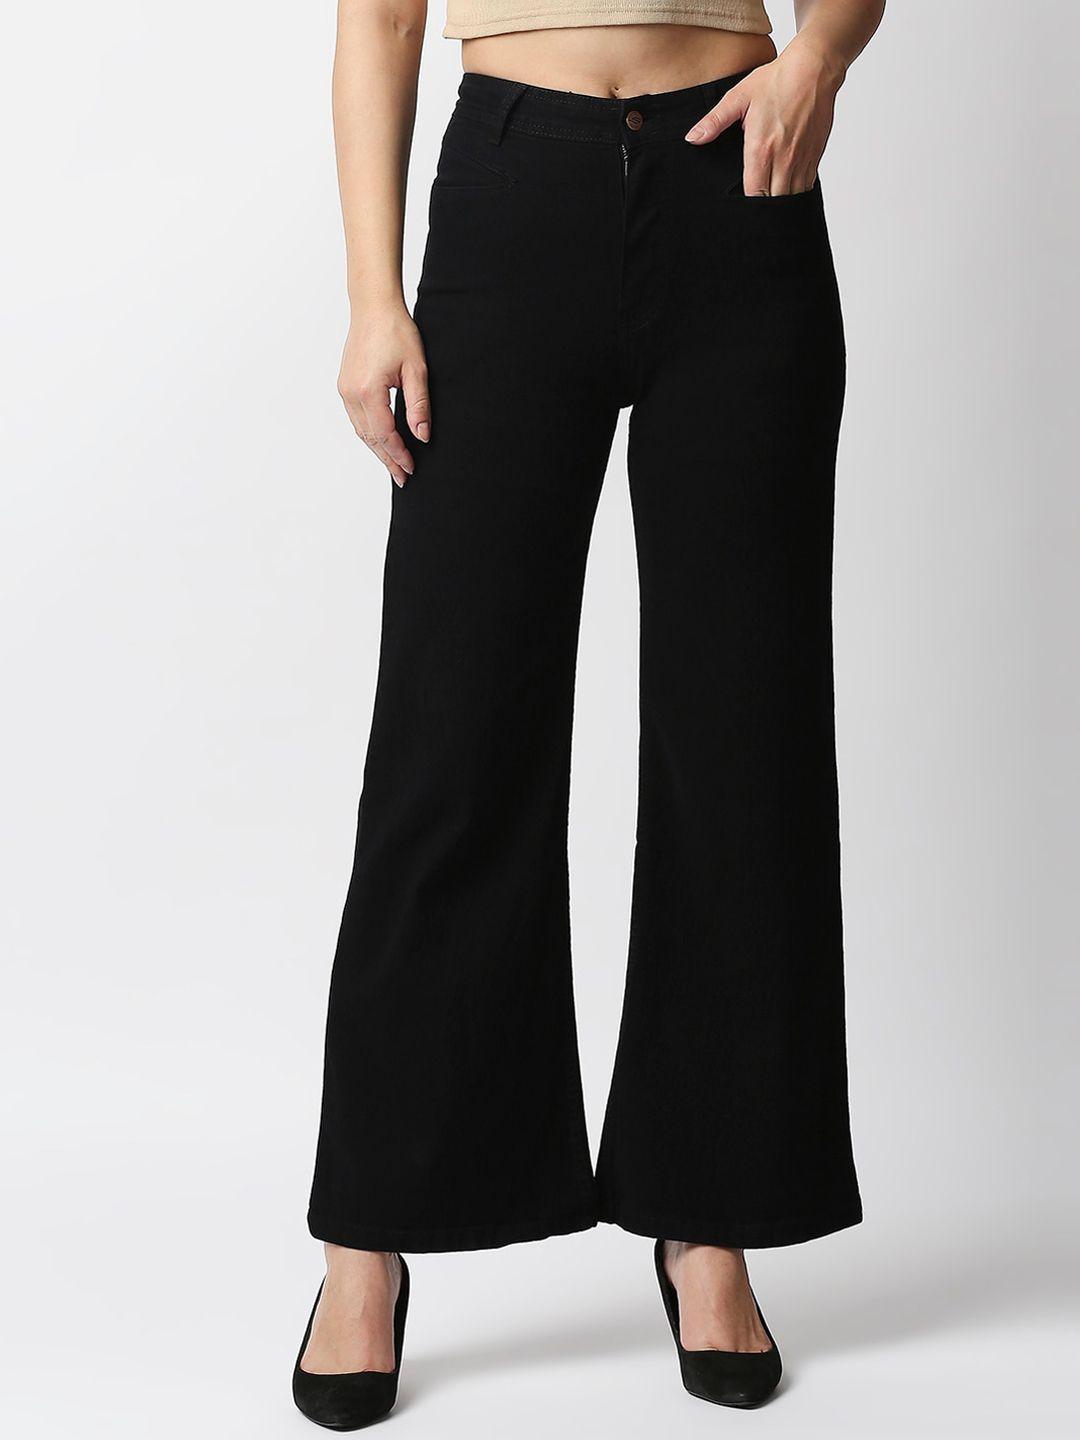 high-star-women-black-wide-leg-high-rise-stretchable-jeans